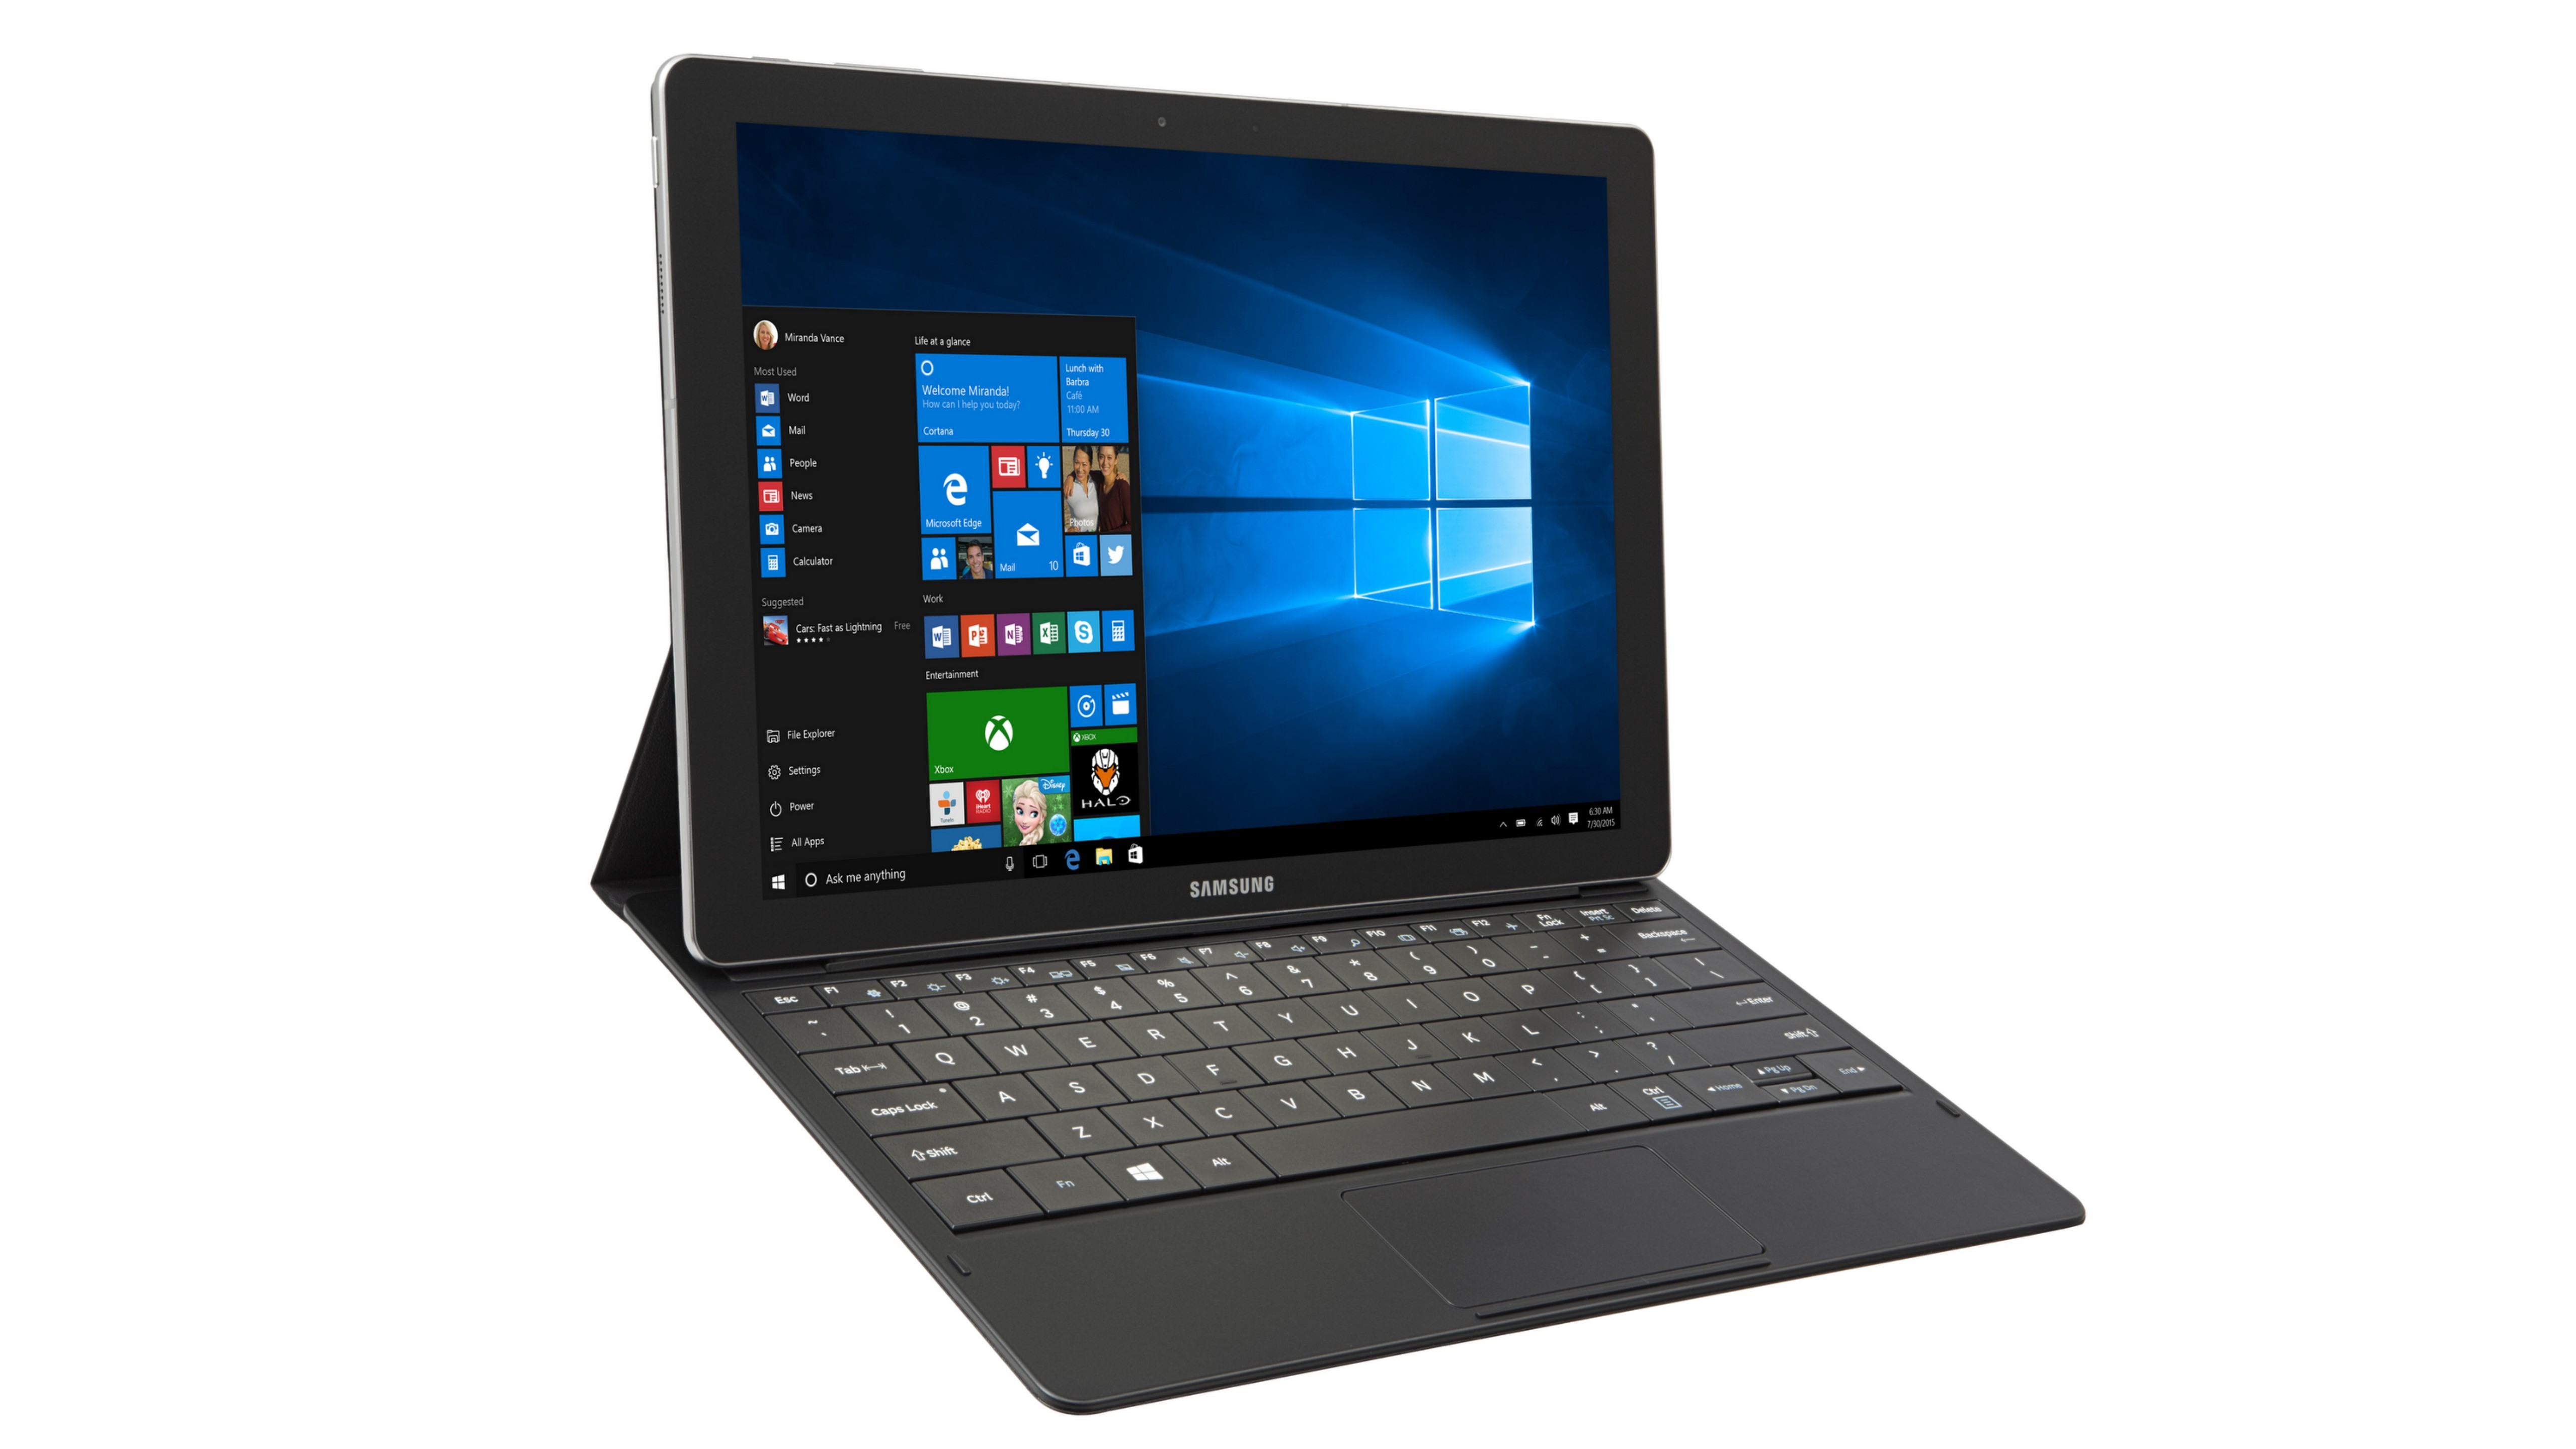 Samsung-Galaxy-TabPro-S-will-be-soon-launched-in-India-with Windows-10-and-Deatachable-Keyboard